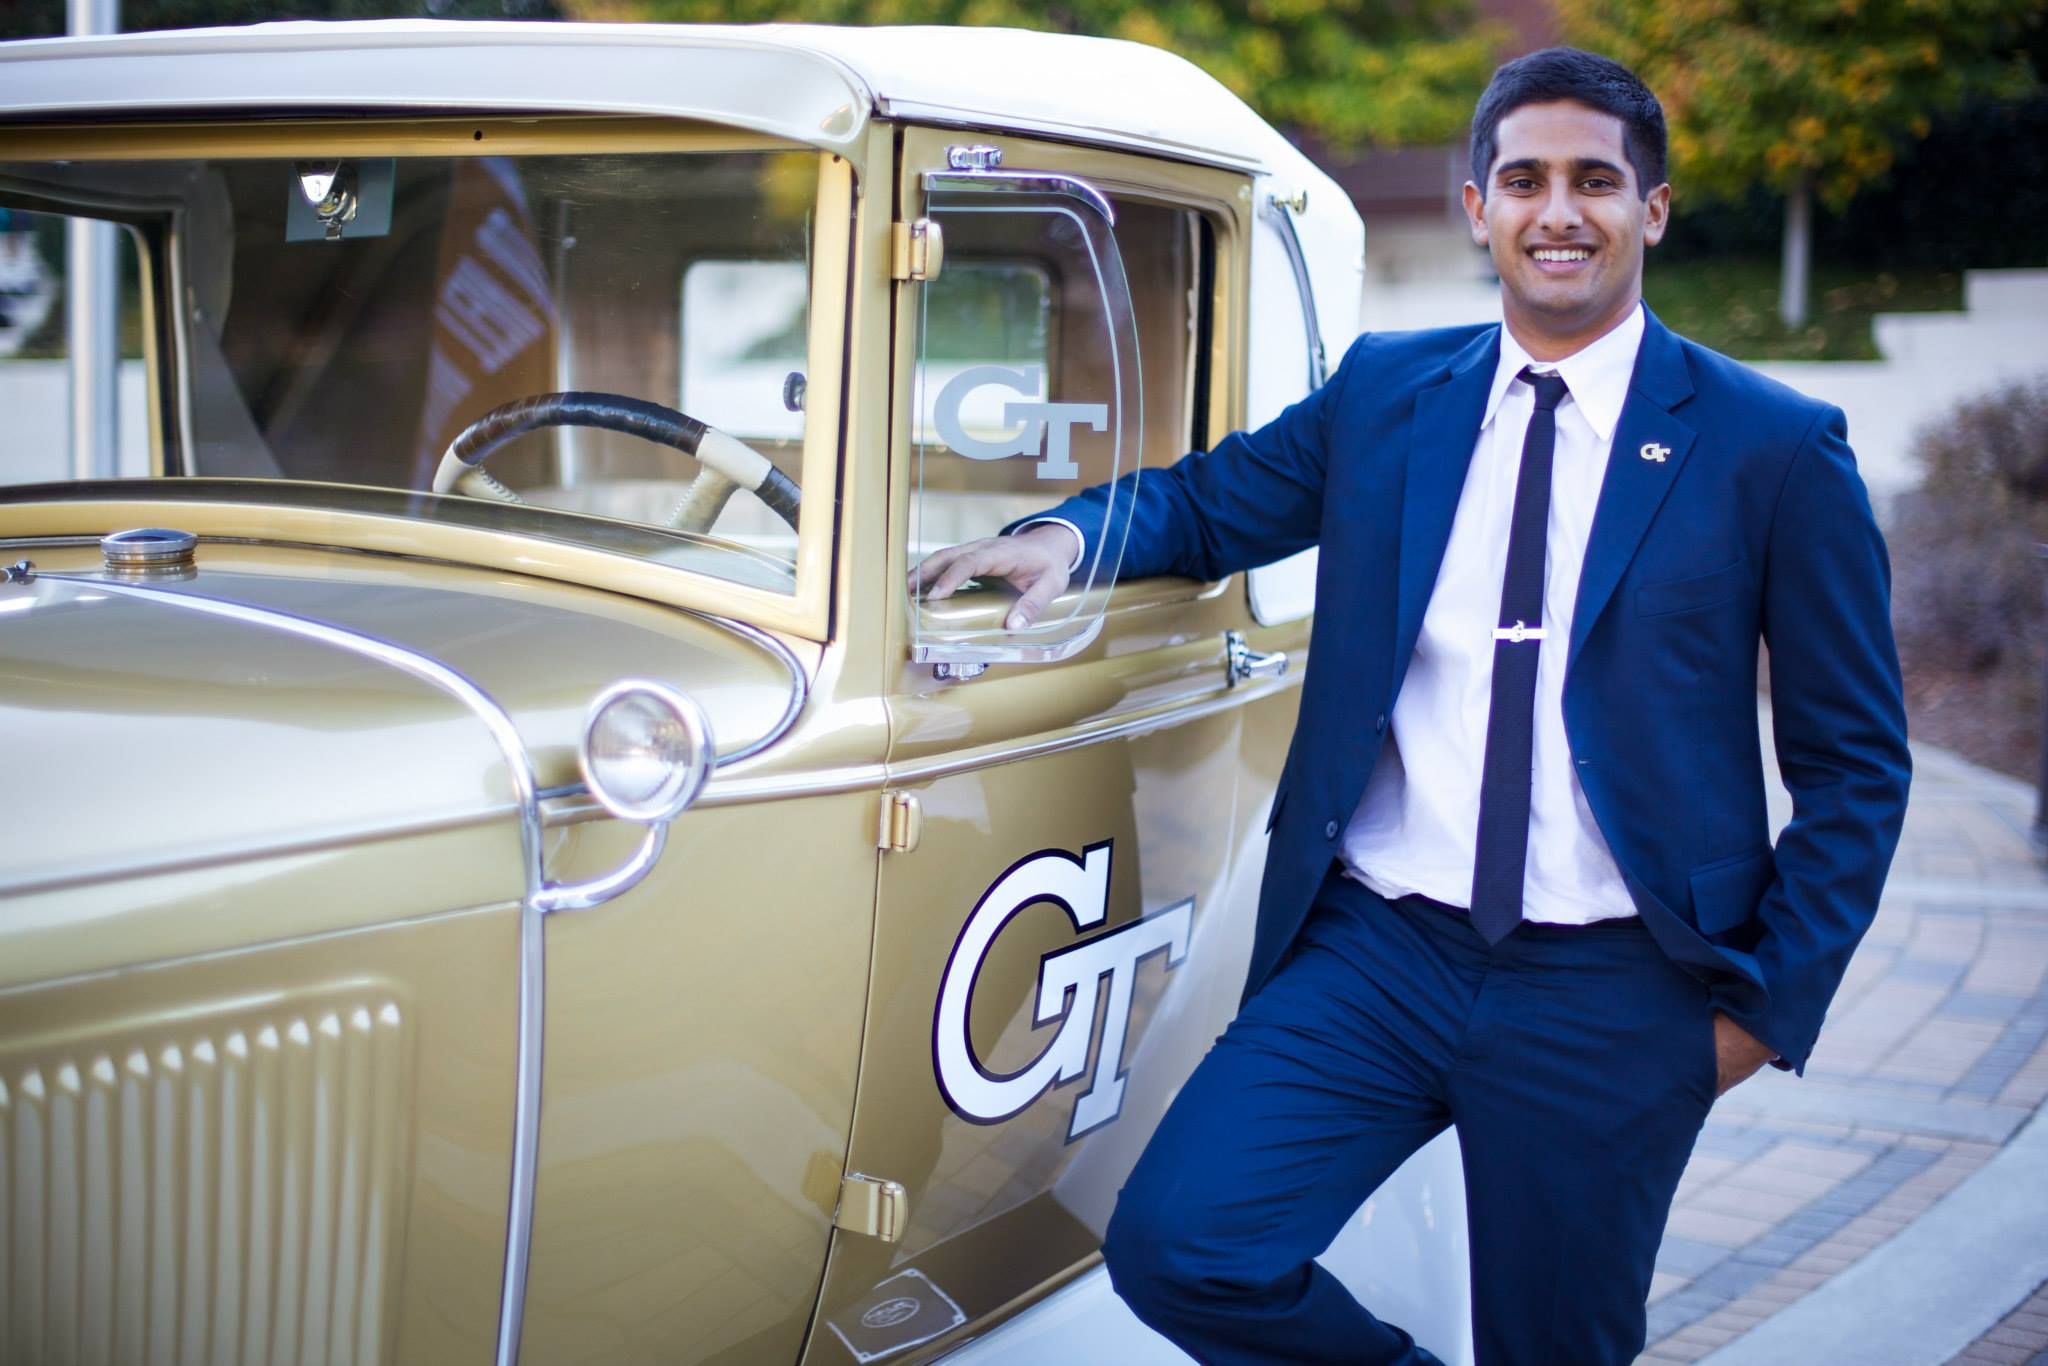 Raj Desai uses his role as driver of the Ramblin' Wreck to inspire other students.